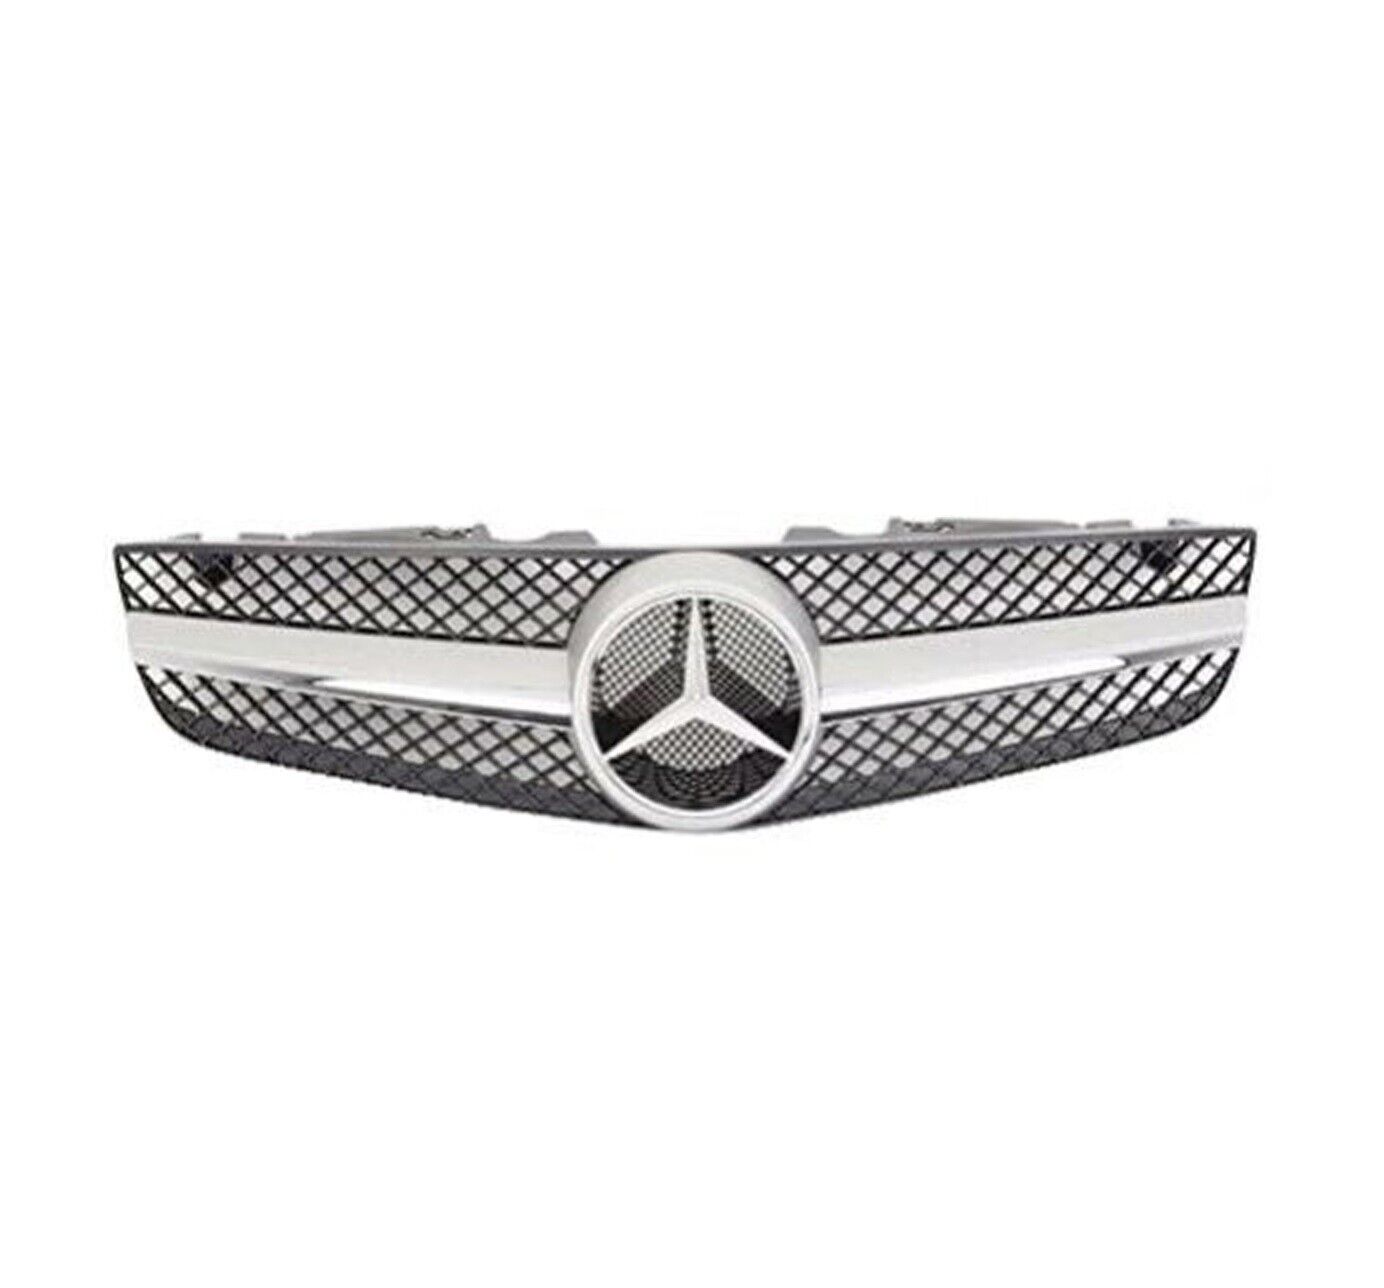 Genuine Grille Assembly for Mercedes-Benz R230 SL-Class SL500 SL63 2009-2011